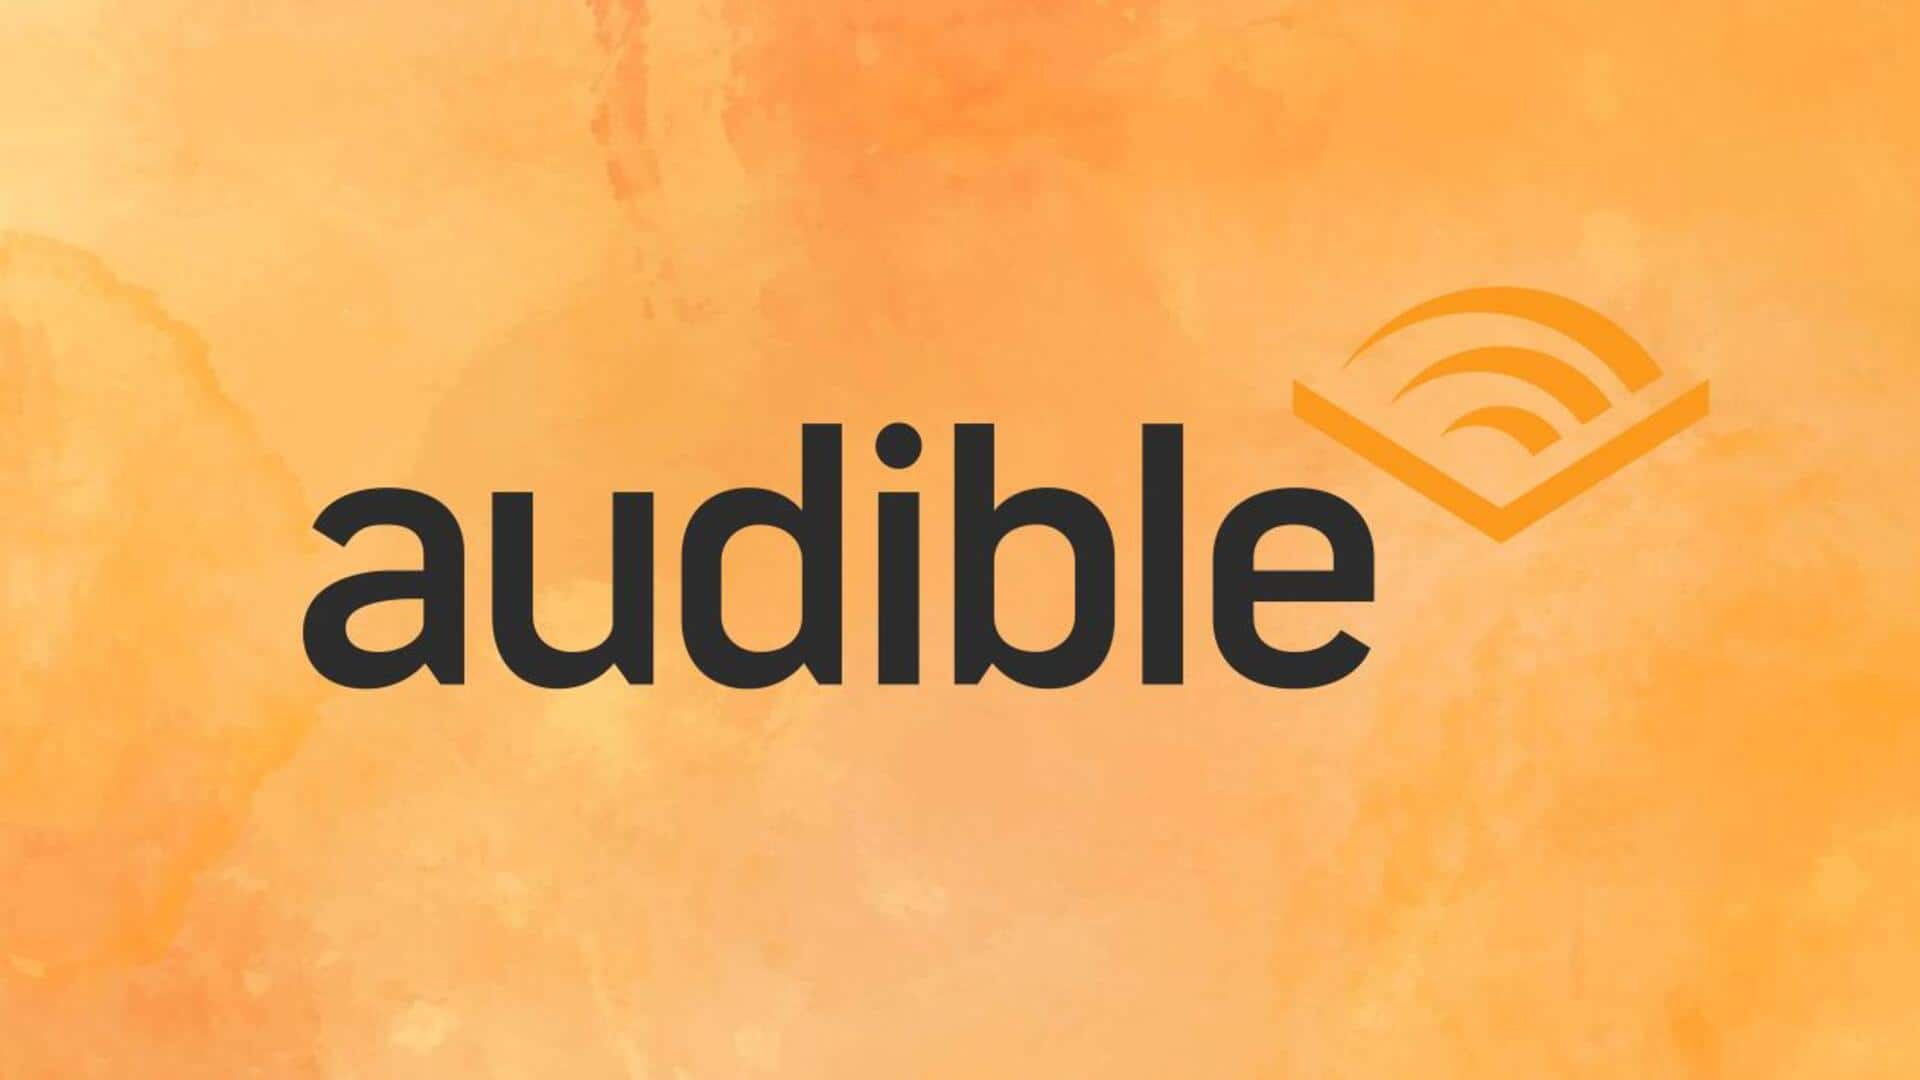 How to enhance your reading experience with Audible